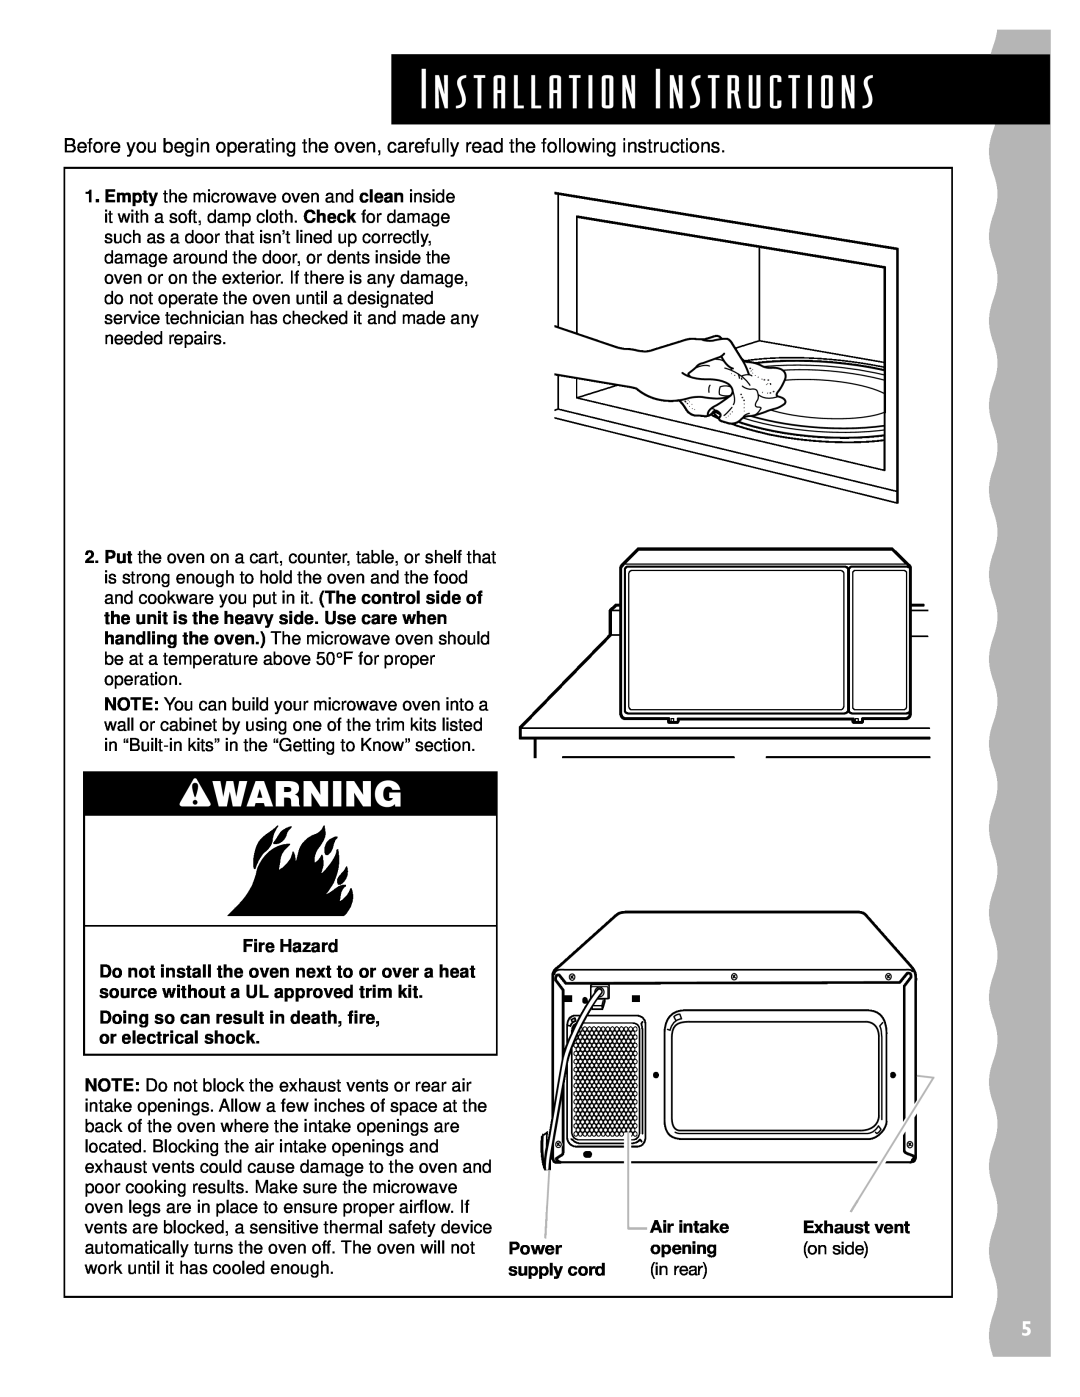 KitchenAid KCMS135H Installation Instructions, wWARNING, Air intake, Exhaust vent, Power, opening, on side, supply cord 